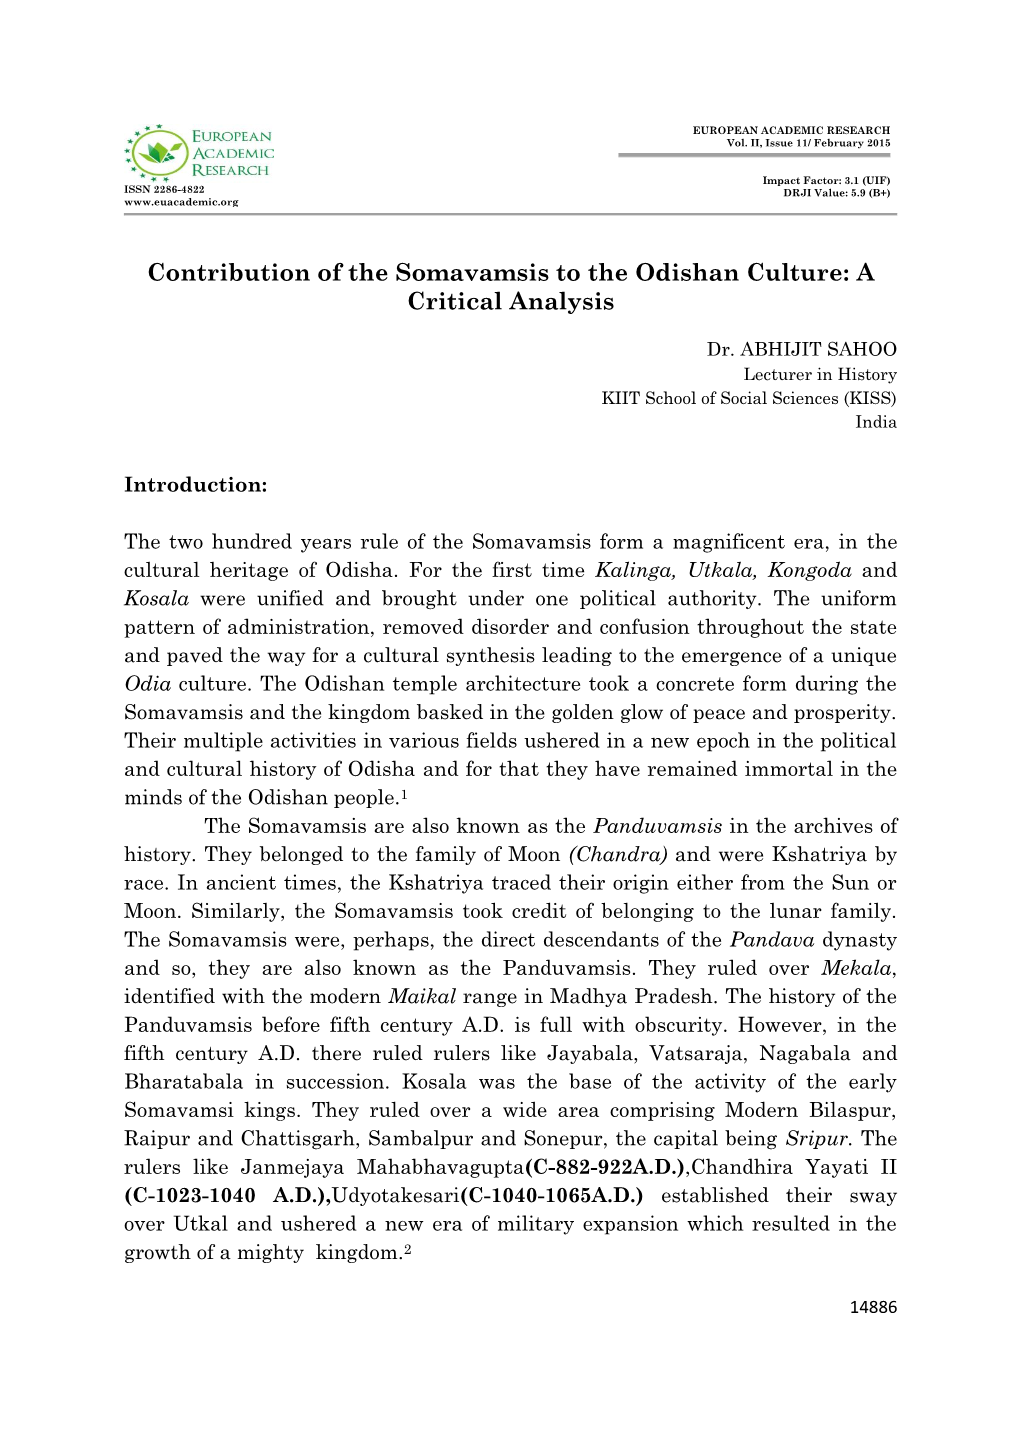 Contribution of the Somavamsis to the Odishan Culture: a Critical Analysis